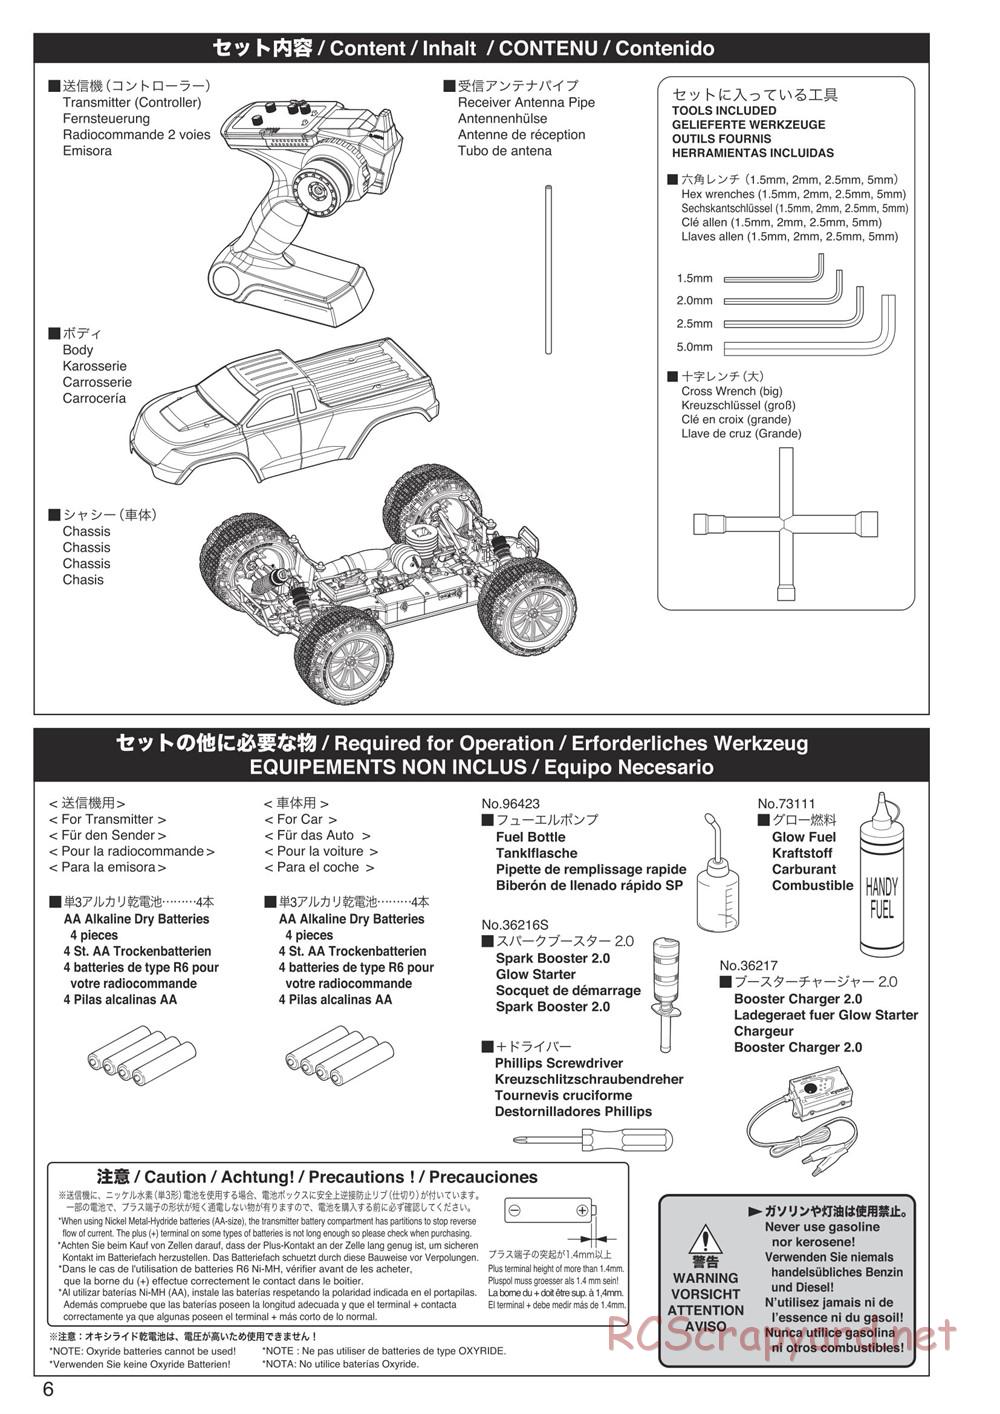 Kyosho - DMT - Manual - Page 6